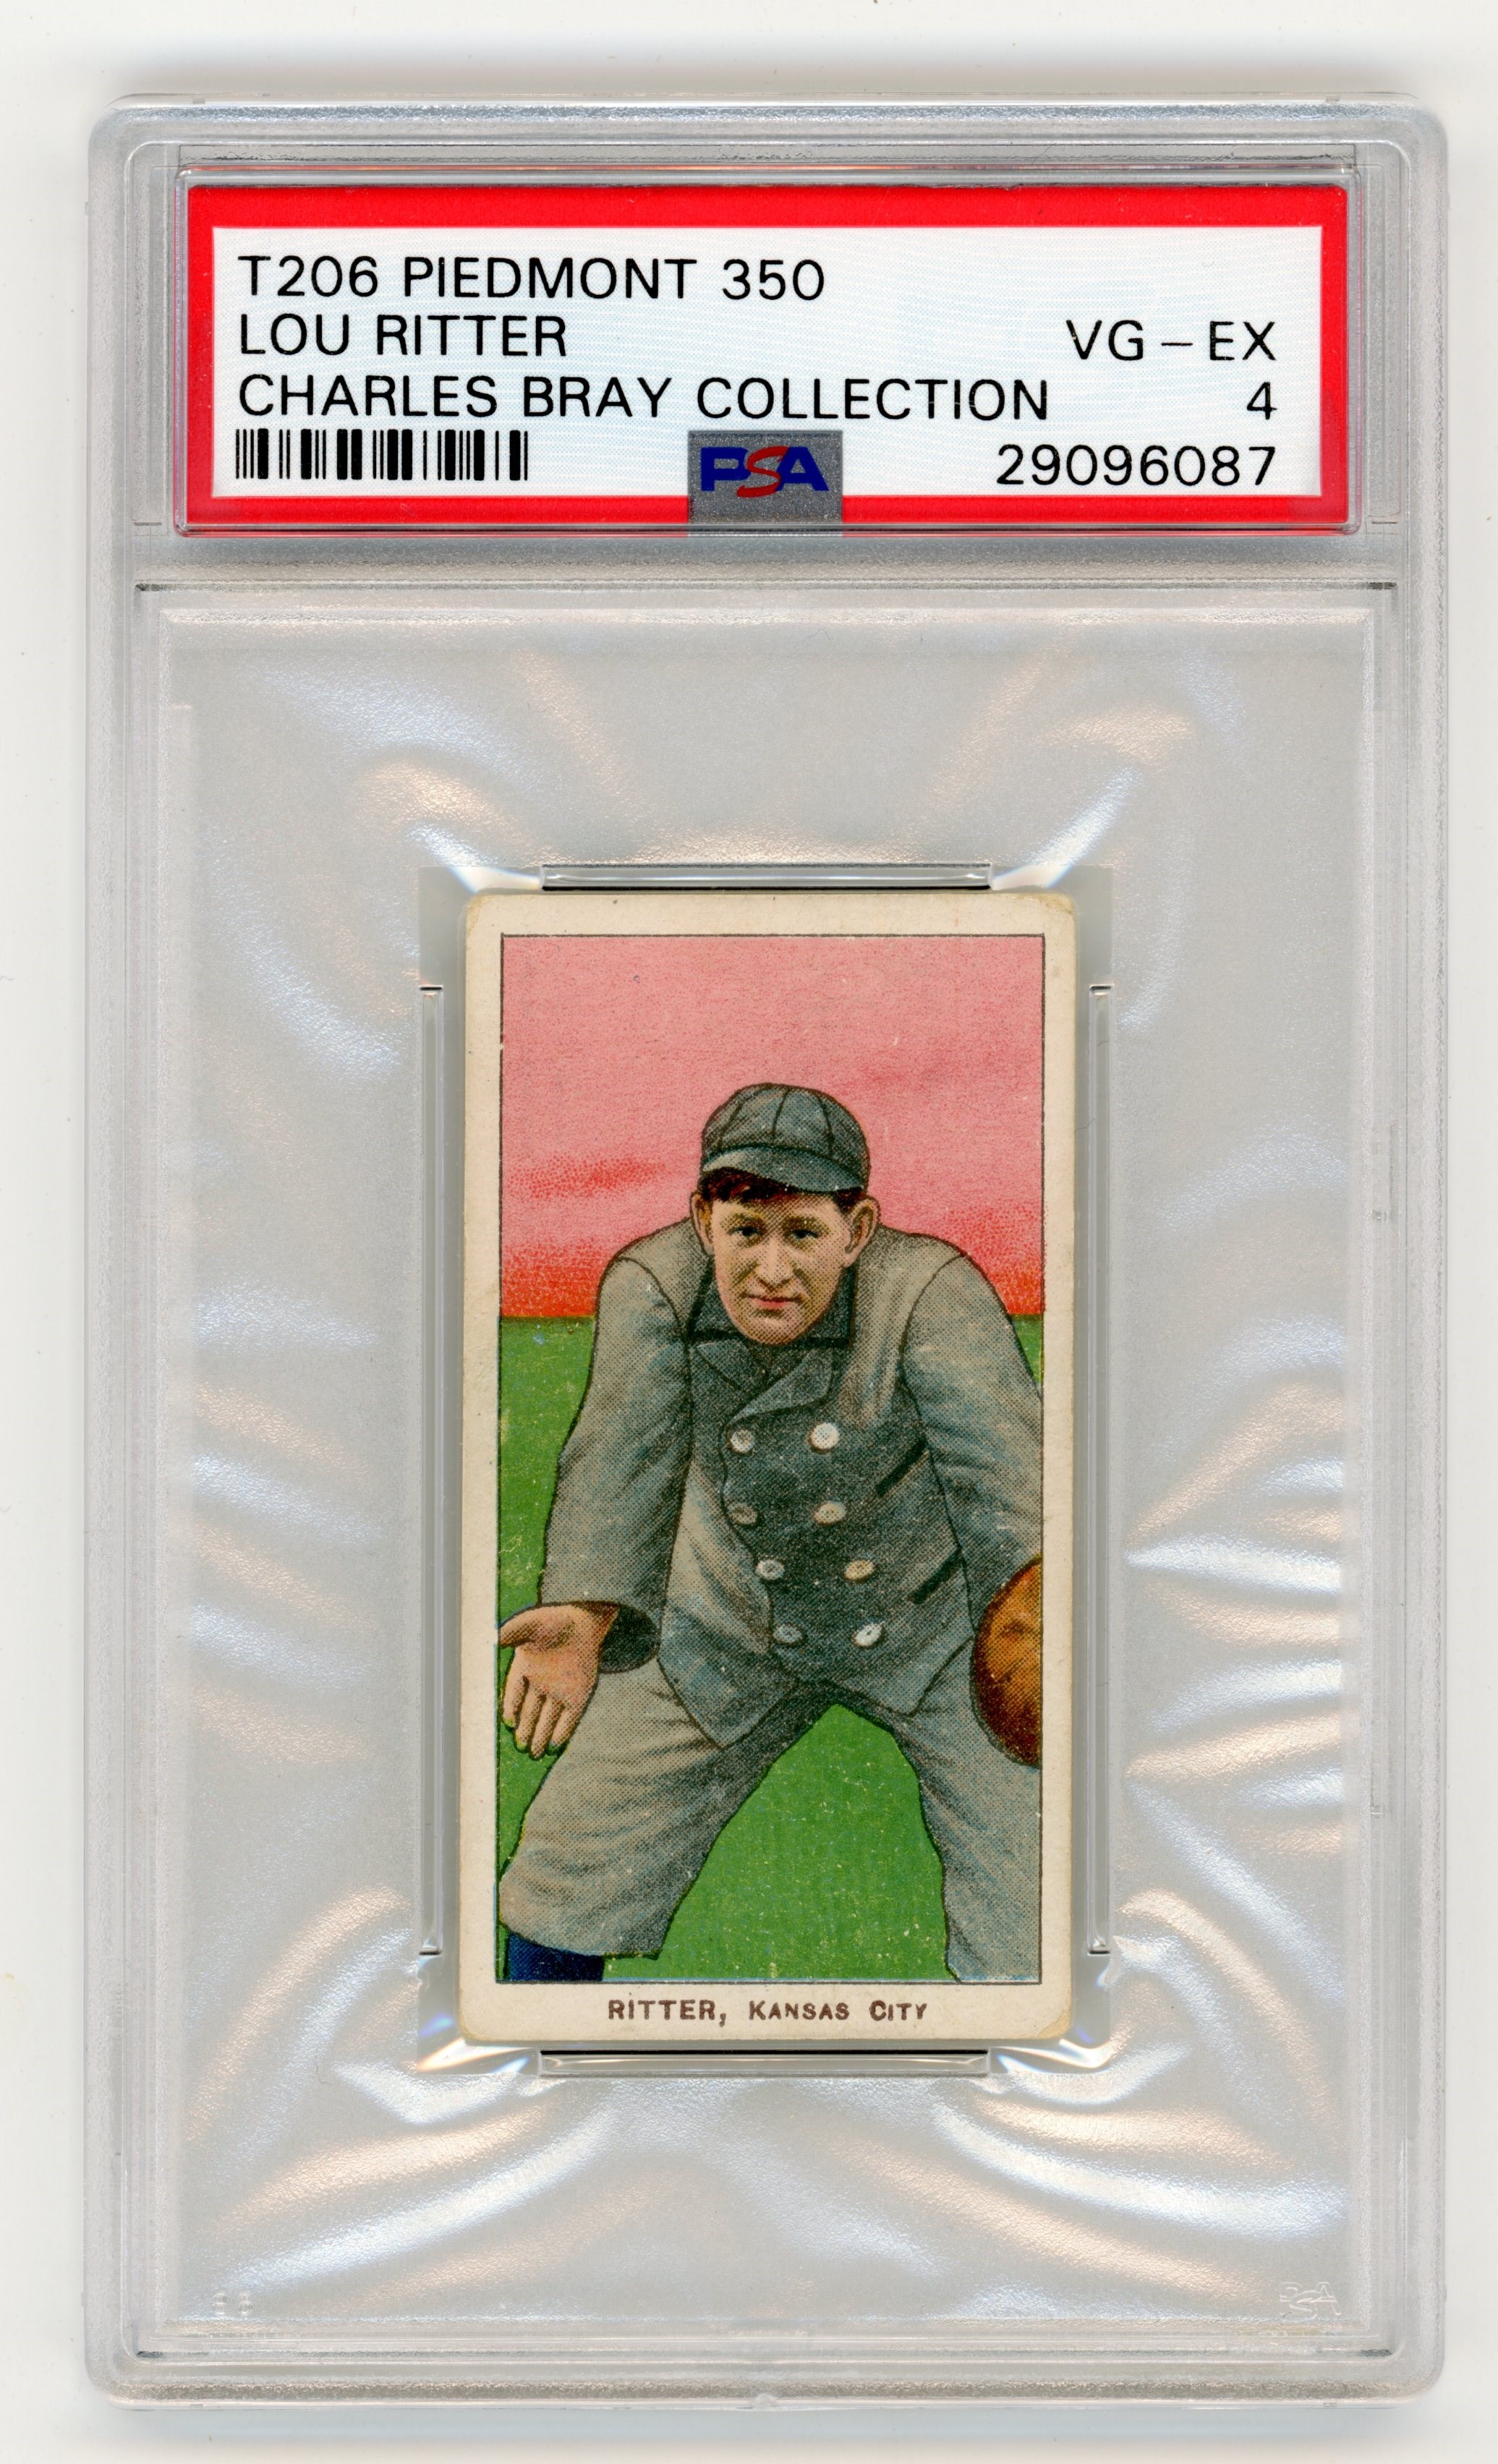 - T206 Piedmont 350 Lou Ritter PSA VG-EX 4 From the Charles Bray Collection.